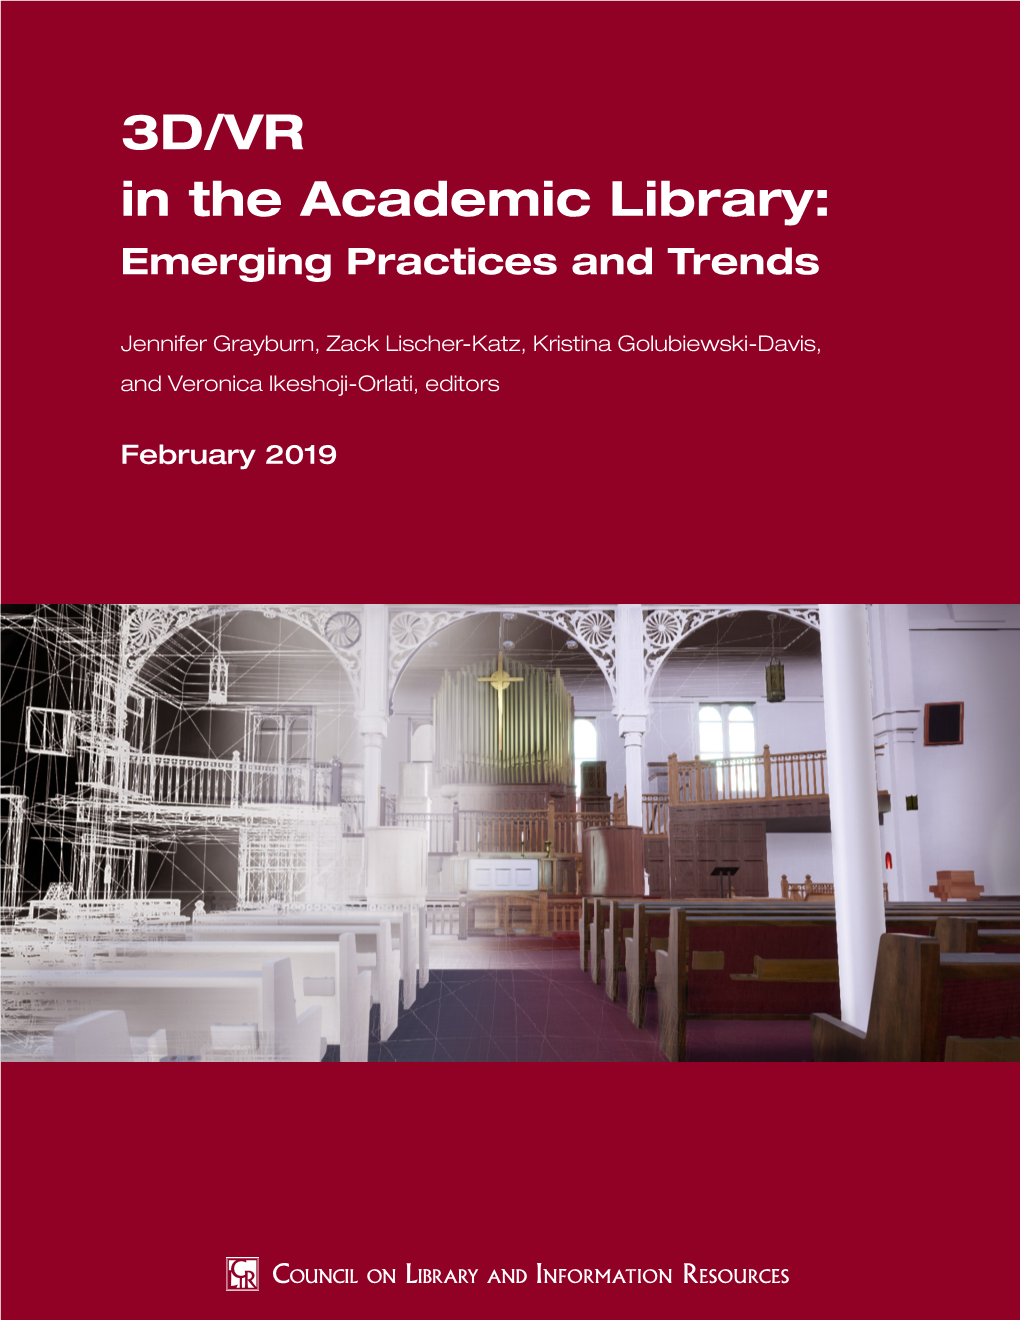 3D/VR in the Academic Library: Emerging Practices and Trends